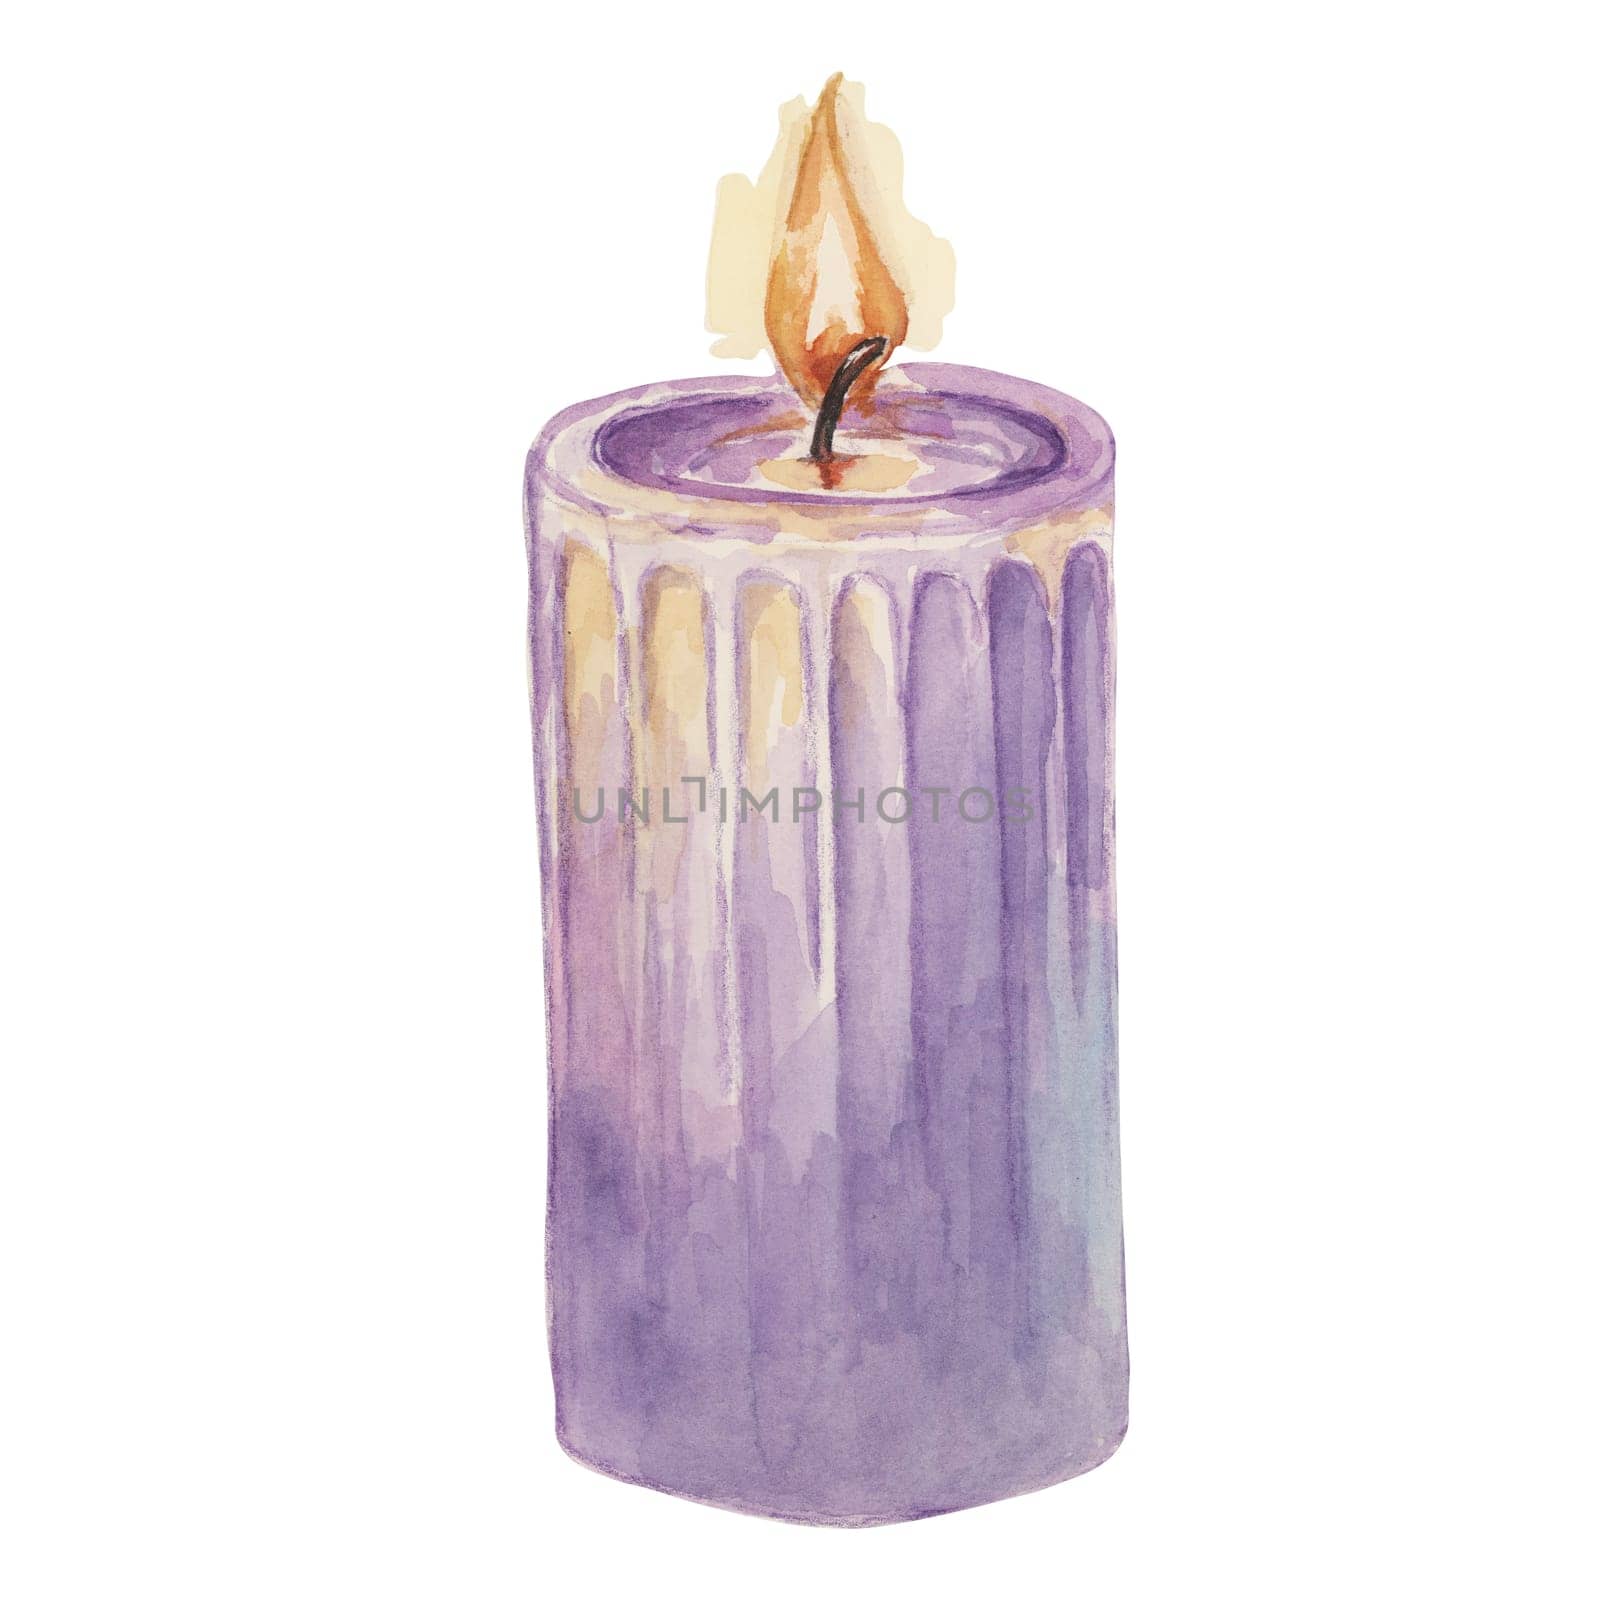 Purple wax candle for home fragrance. Home spa, lavender perfume, aromatherapy watercolor illustration. Hand drawn clipart for beauty, cosmetics, labels design, organic products, wellness, packaging